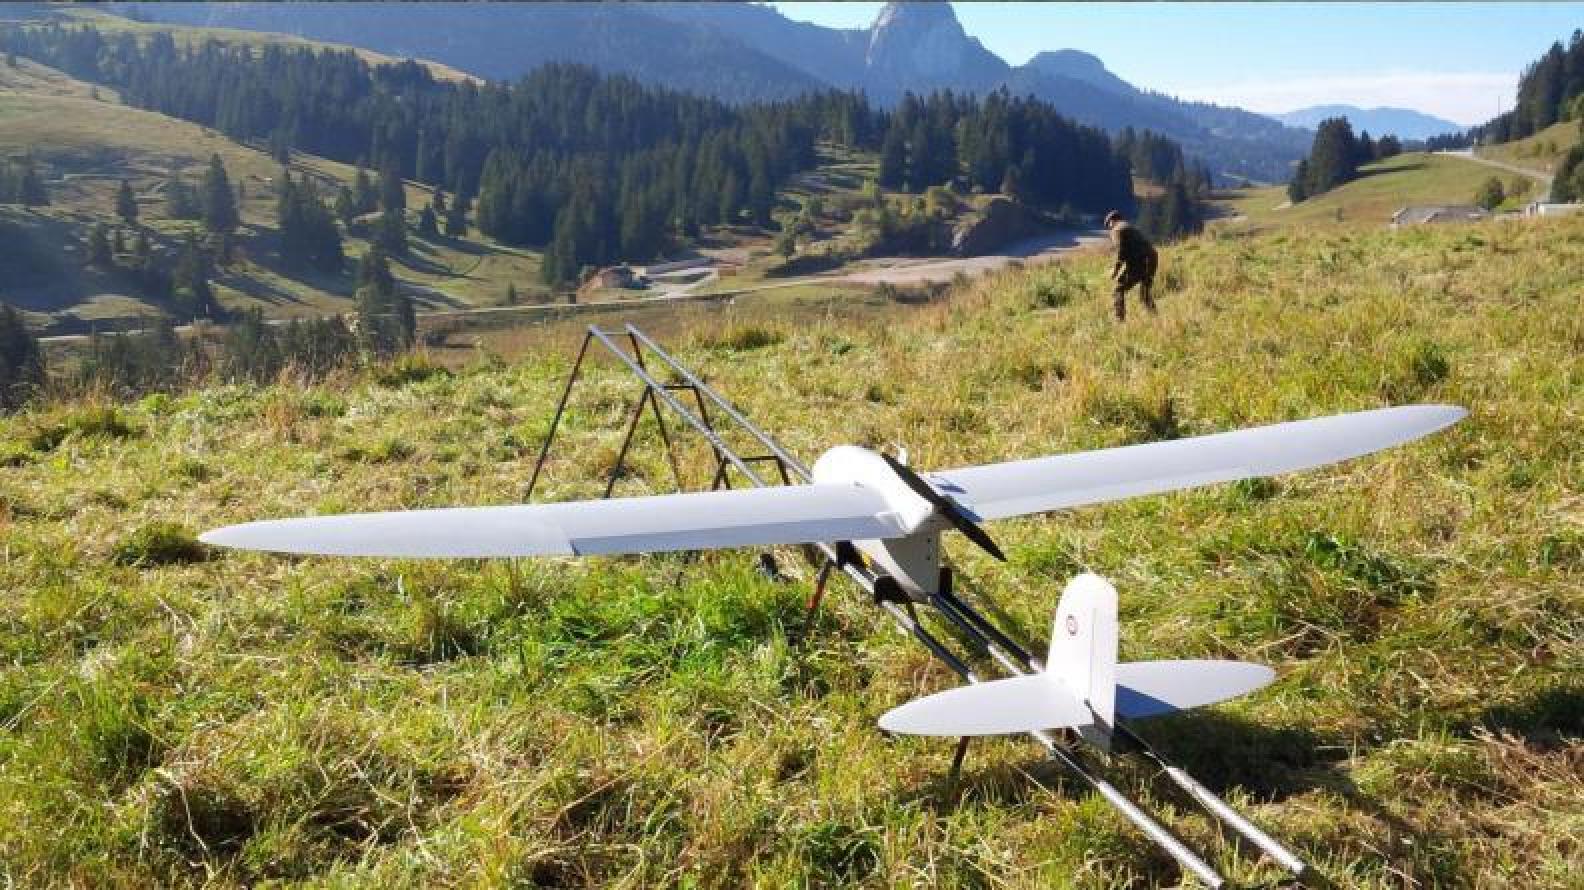 French Army's Intelligence Mini Drone system. Photo: French Ministry of Defence